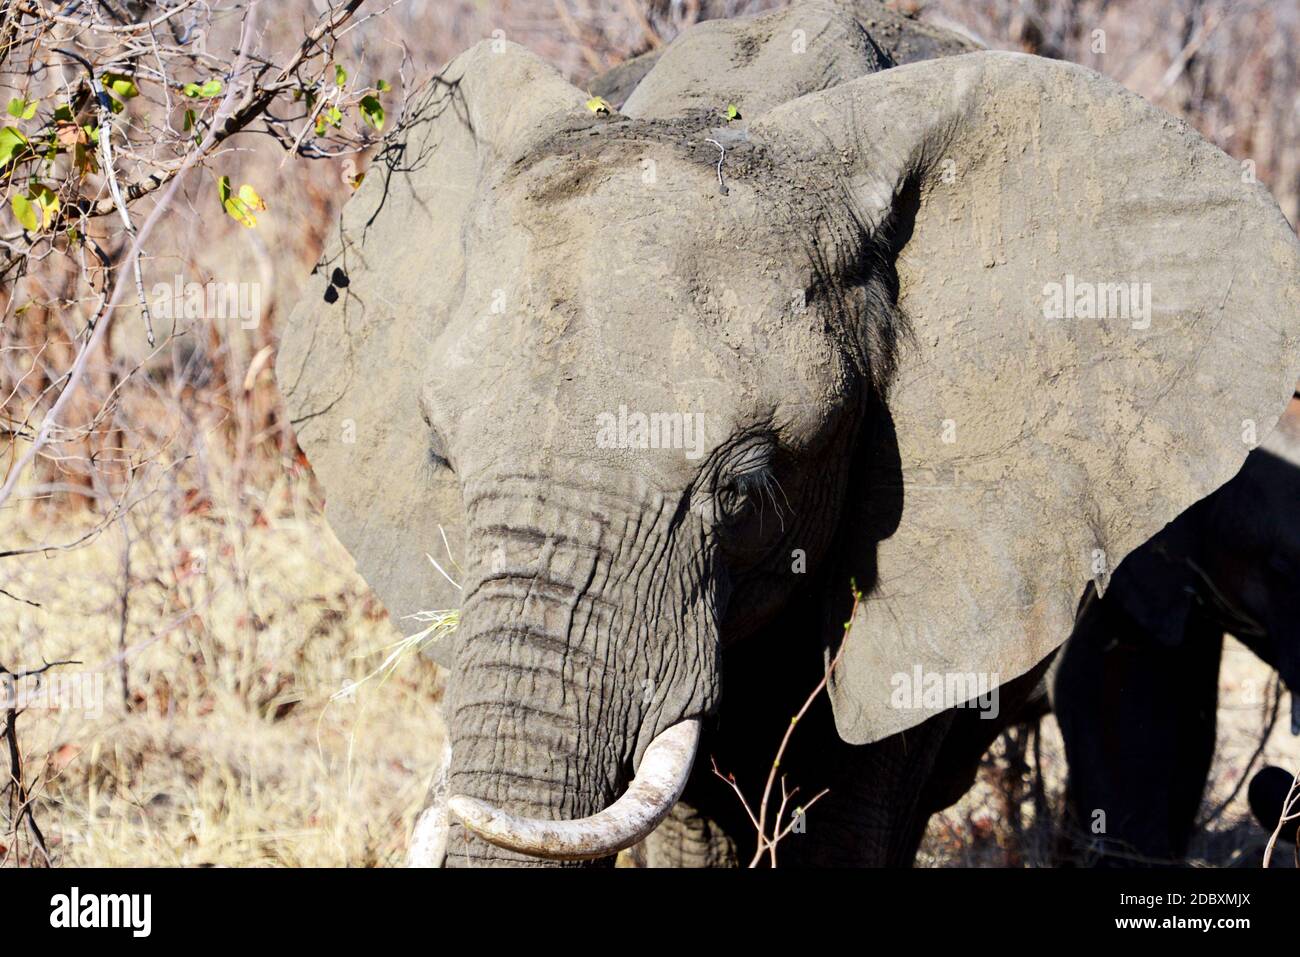 Detail of the elephant in the Kruger National Park in South Africa Stock Photo